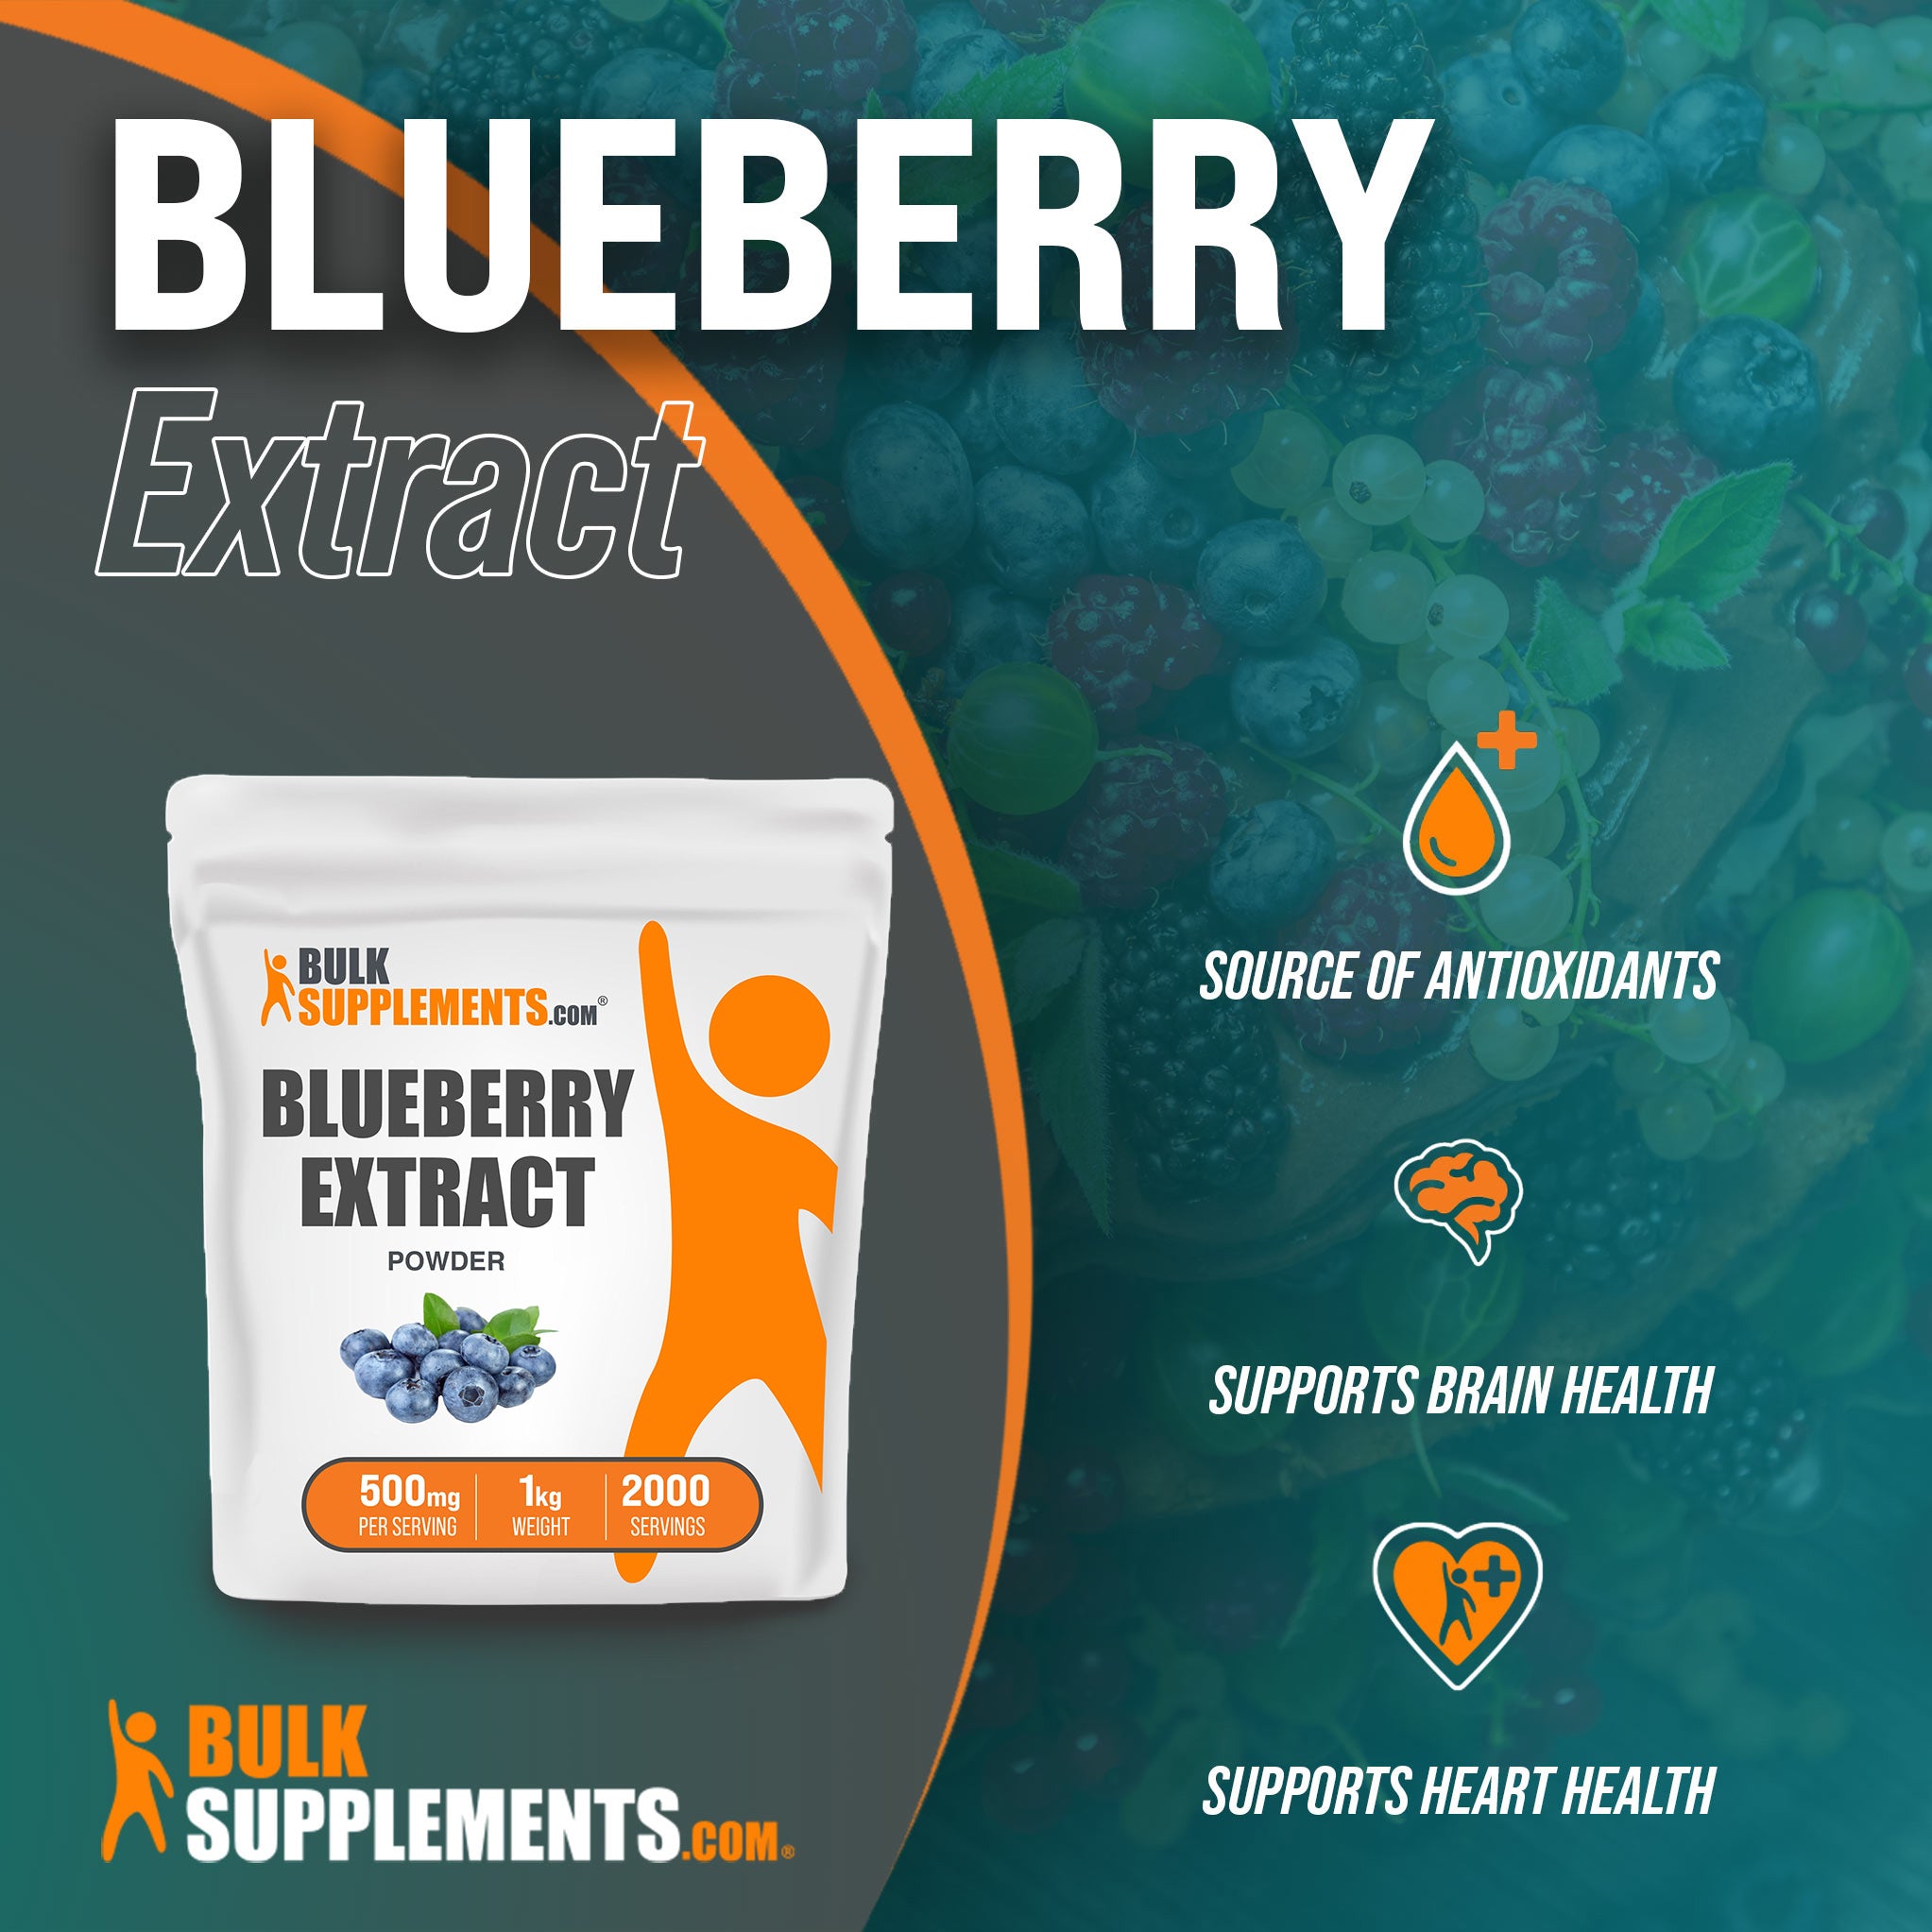 Benefits of Blueberry Extract; source of antioxidants, supports brain health, supports heart health